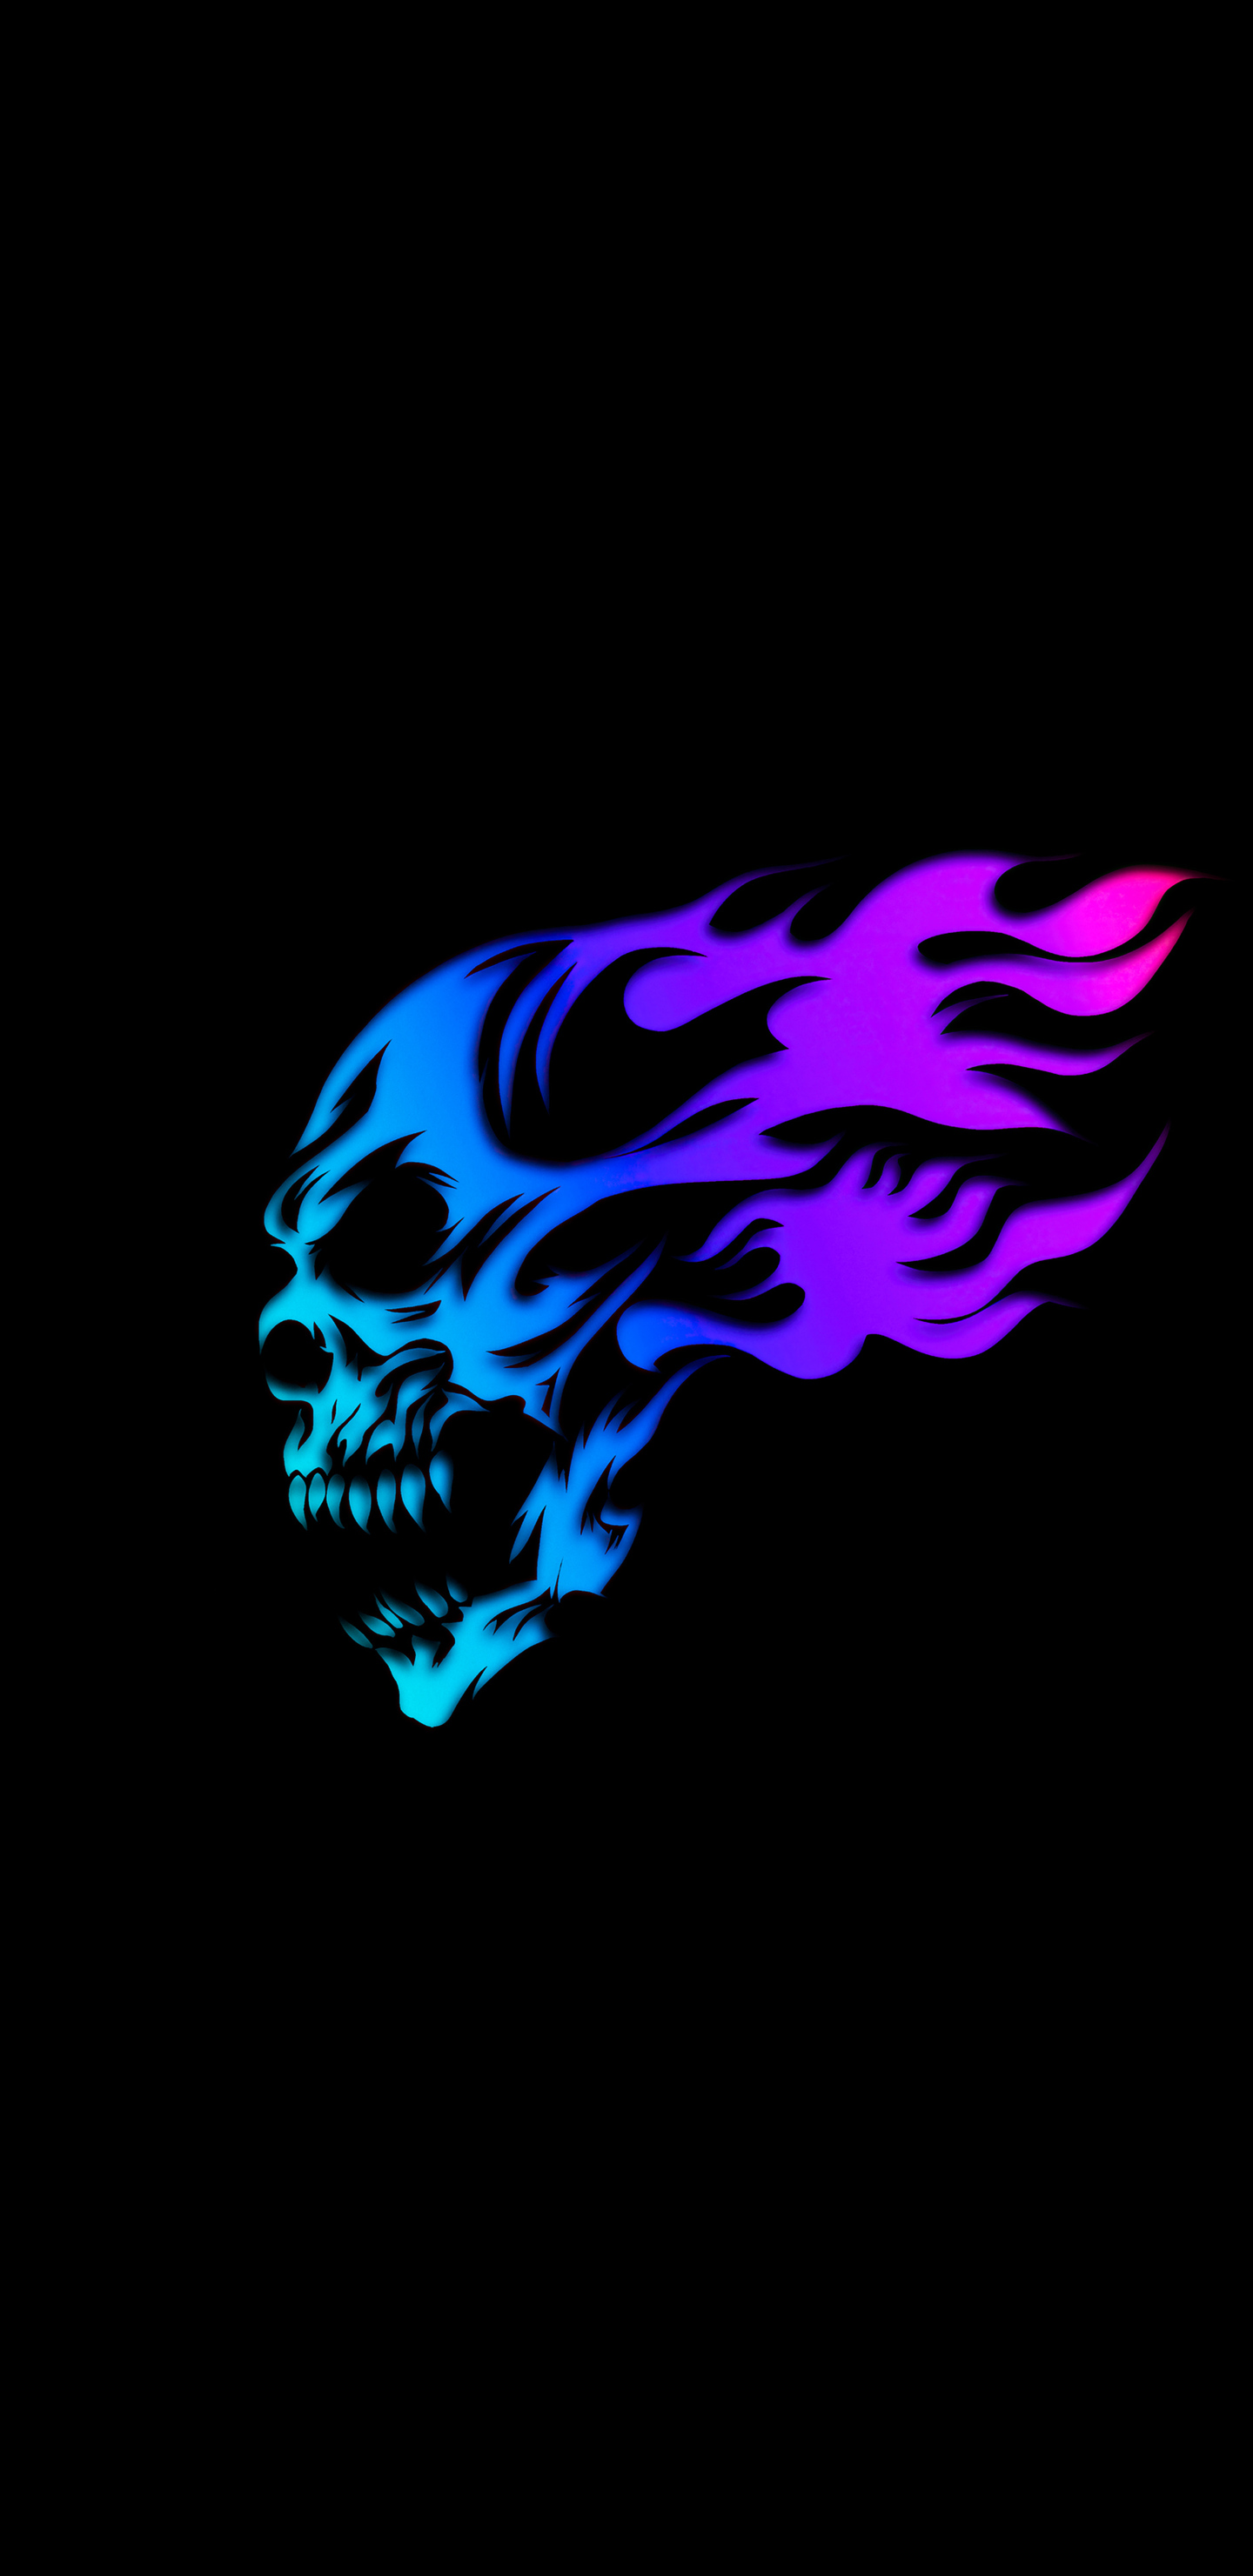 1440x2960 Skull Glowing Minimal Neon 5k Samsung Galaxy Note 9,8, S9,S8,S8+  QHD HD 4k Wallpapers, Images, Backgrounds, Photos and Pictures